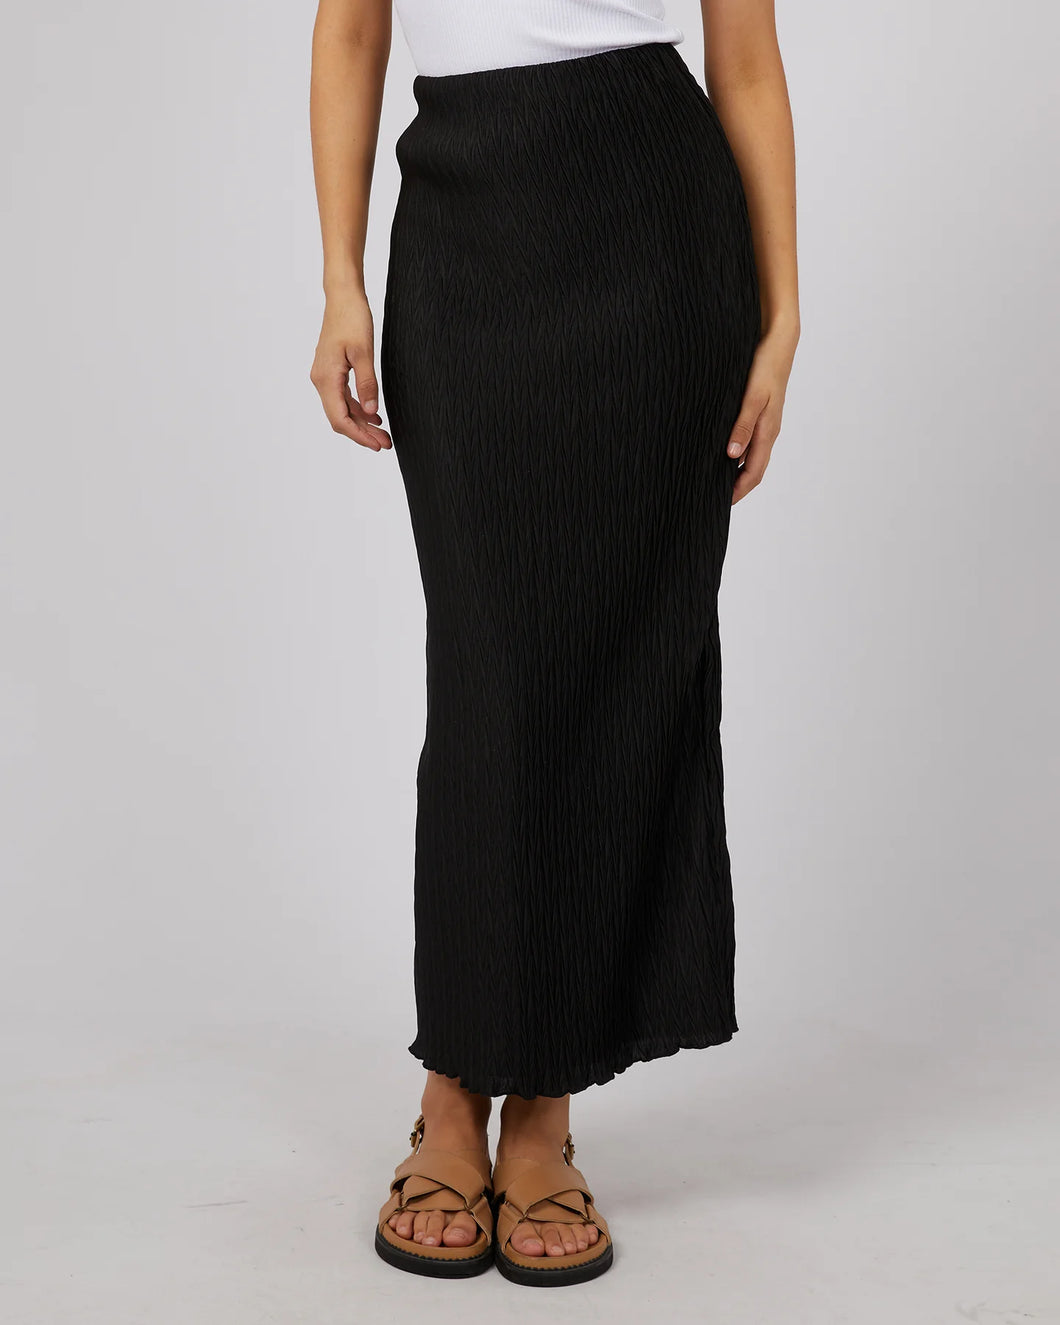 Maxinne Maxi Skirt / Black // All About Eve